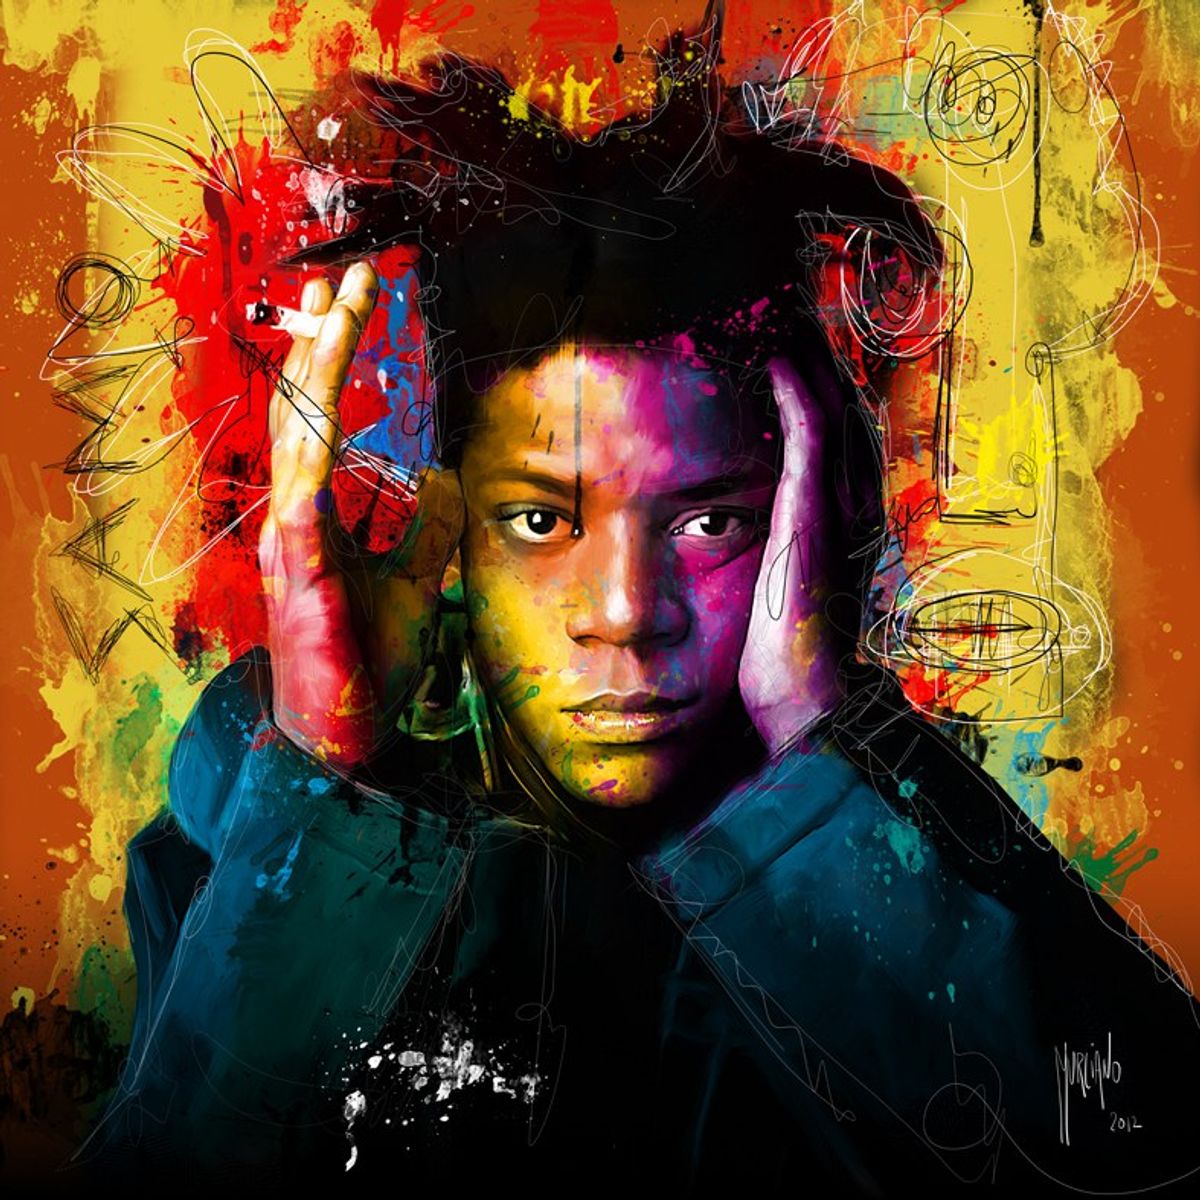 How I Was Introduced To Jean Michel Basquial